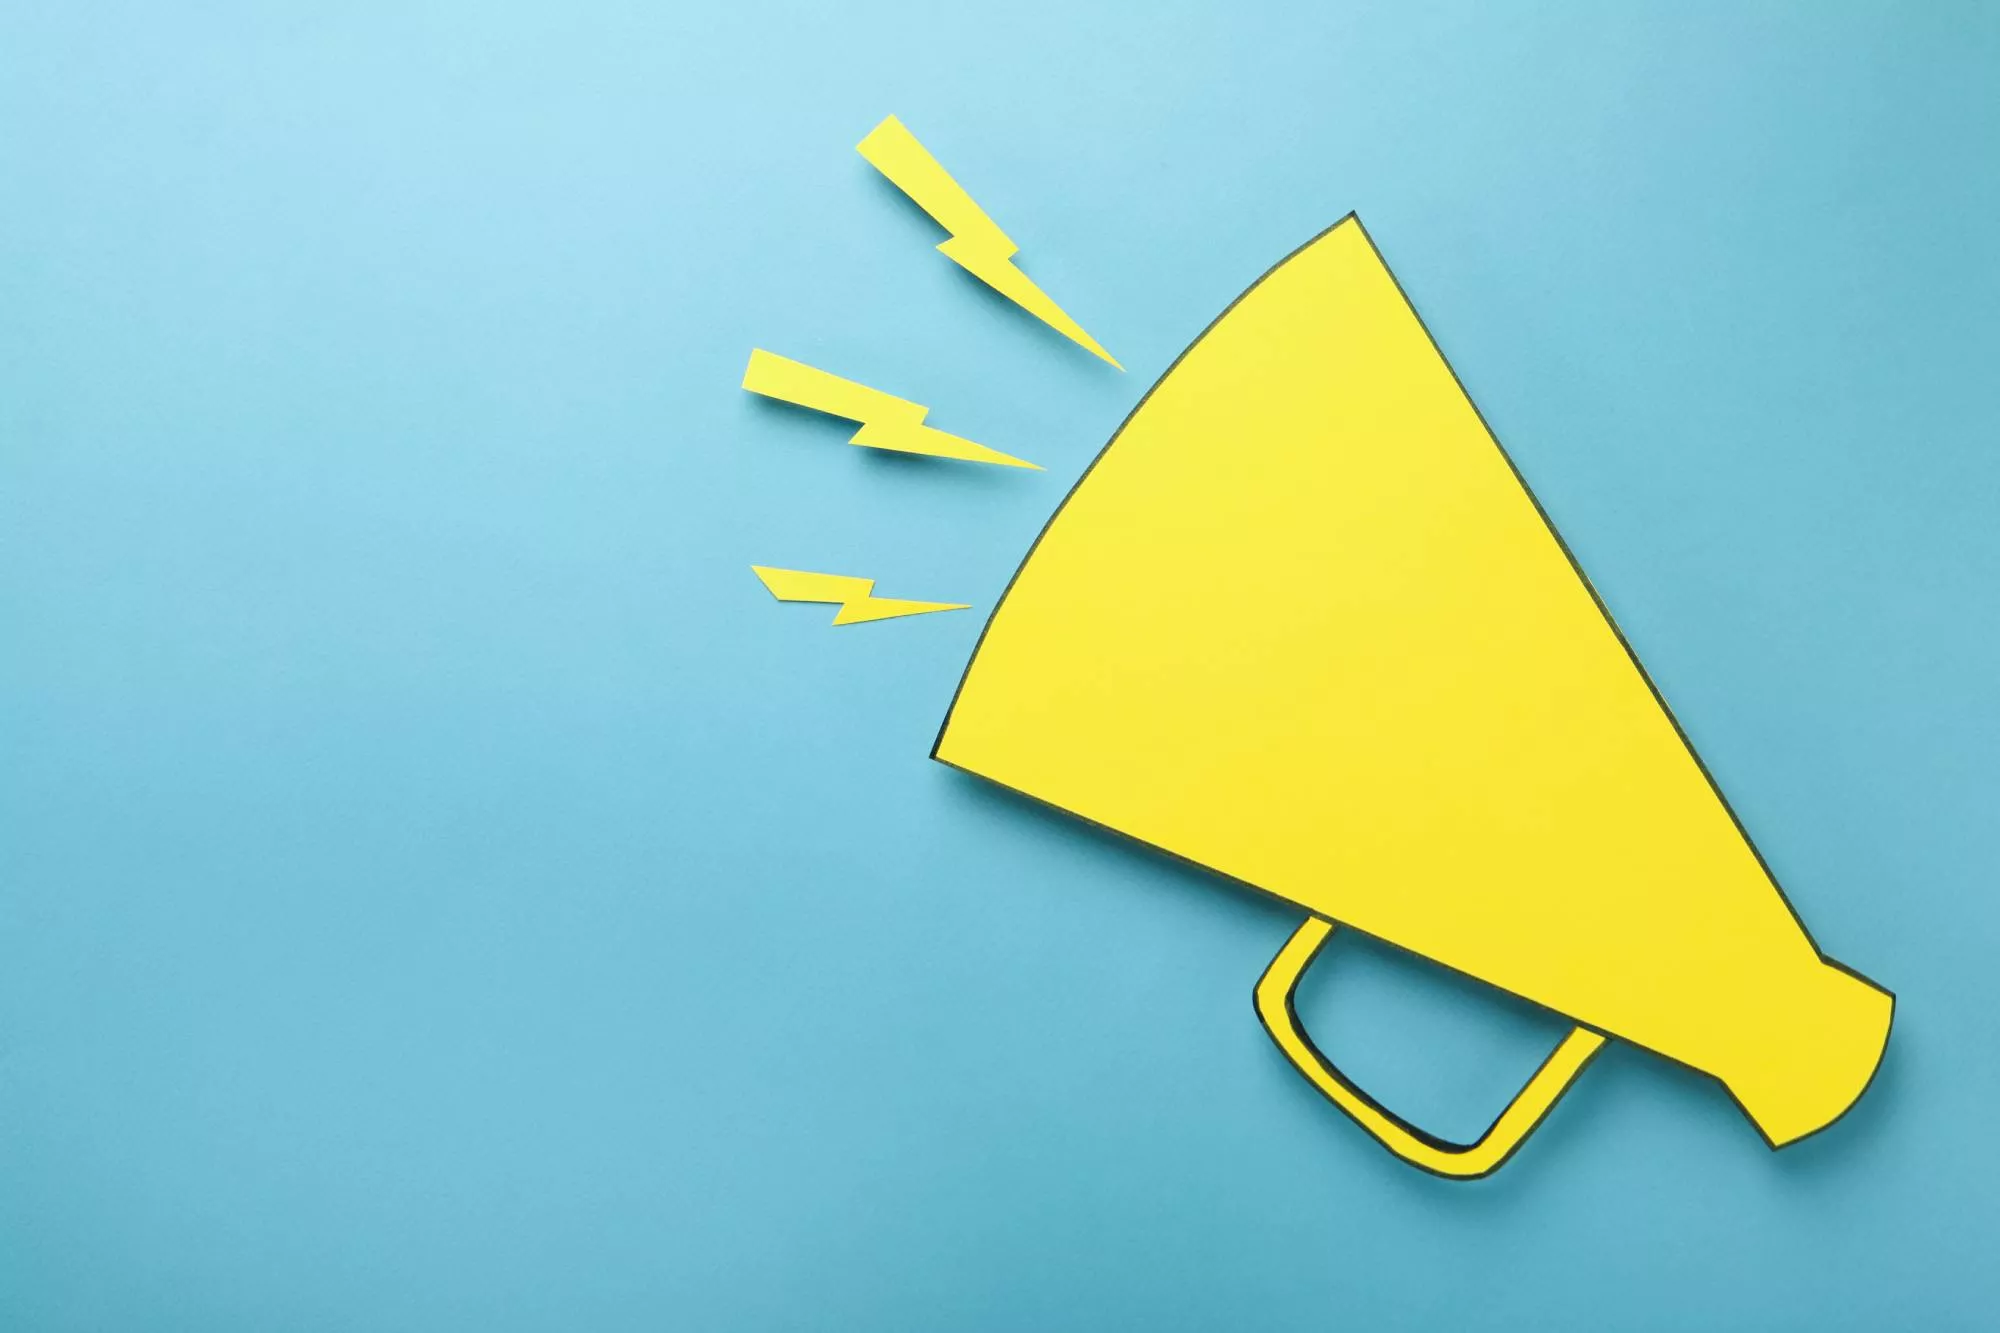 a yellow megaphone drawing on a blue background used to talk about voice authorization fee